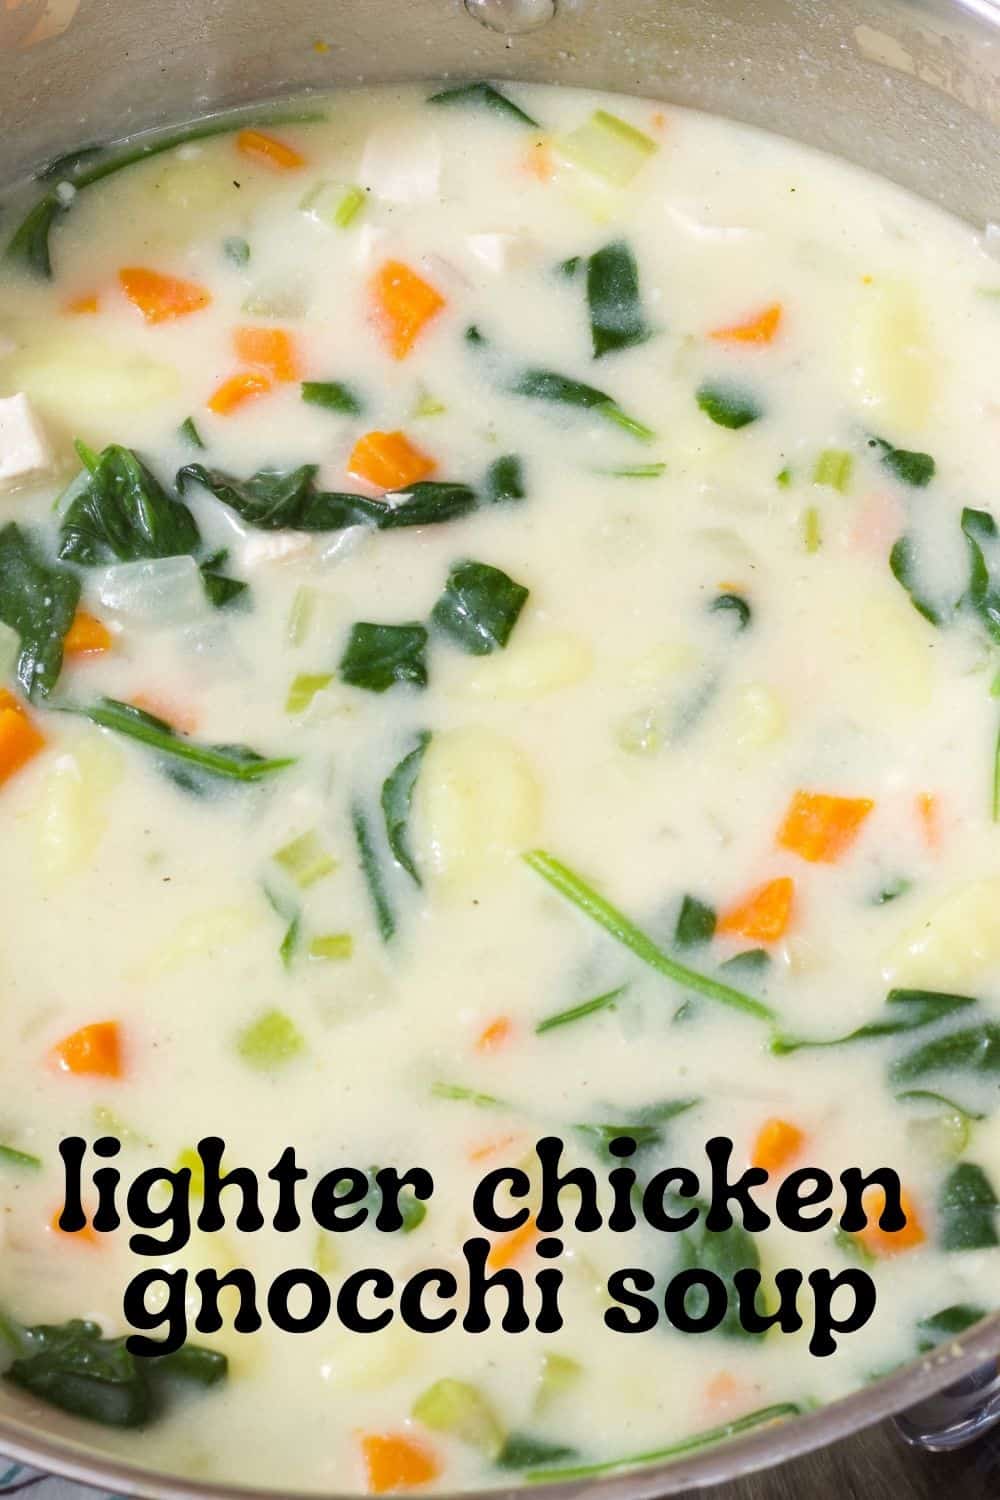 Lighter Chicken Gnocchi Soup is a hearty and comforting dish that uses milk instead of heavy cream to lighten up this Olive Garden favorite! #gnocchisoup #heartysouprecipe #onepotmeal